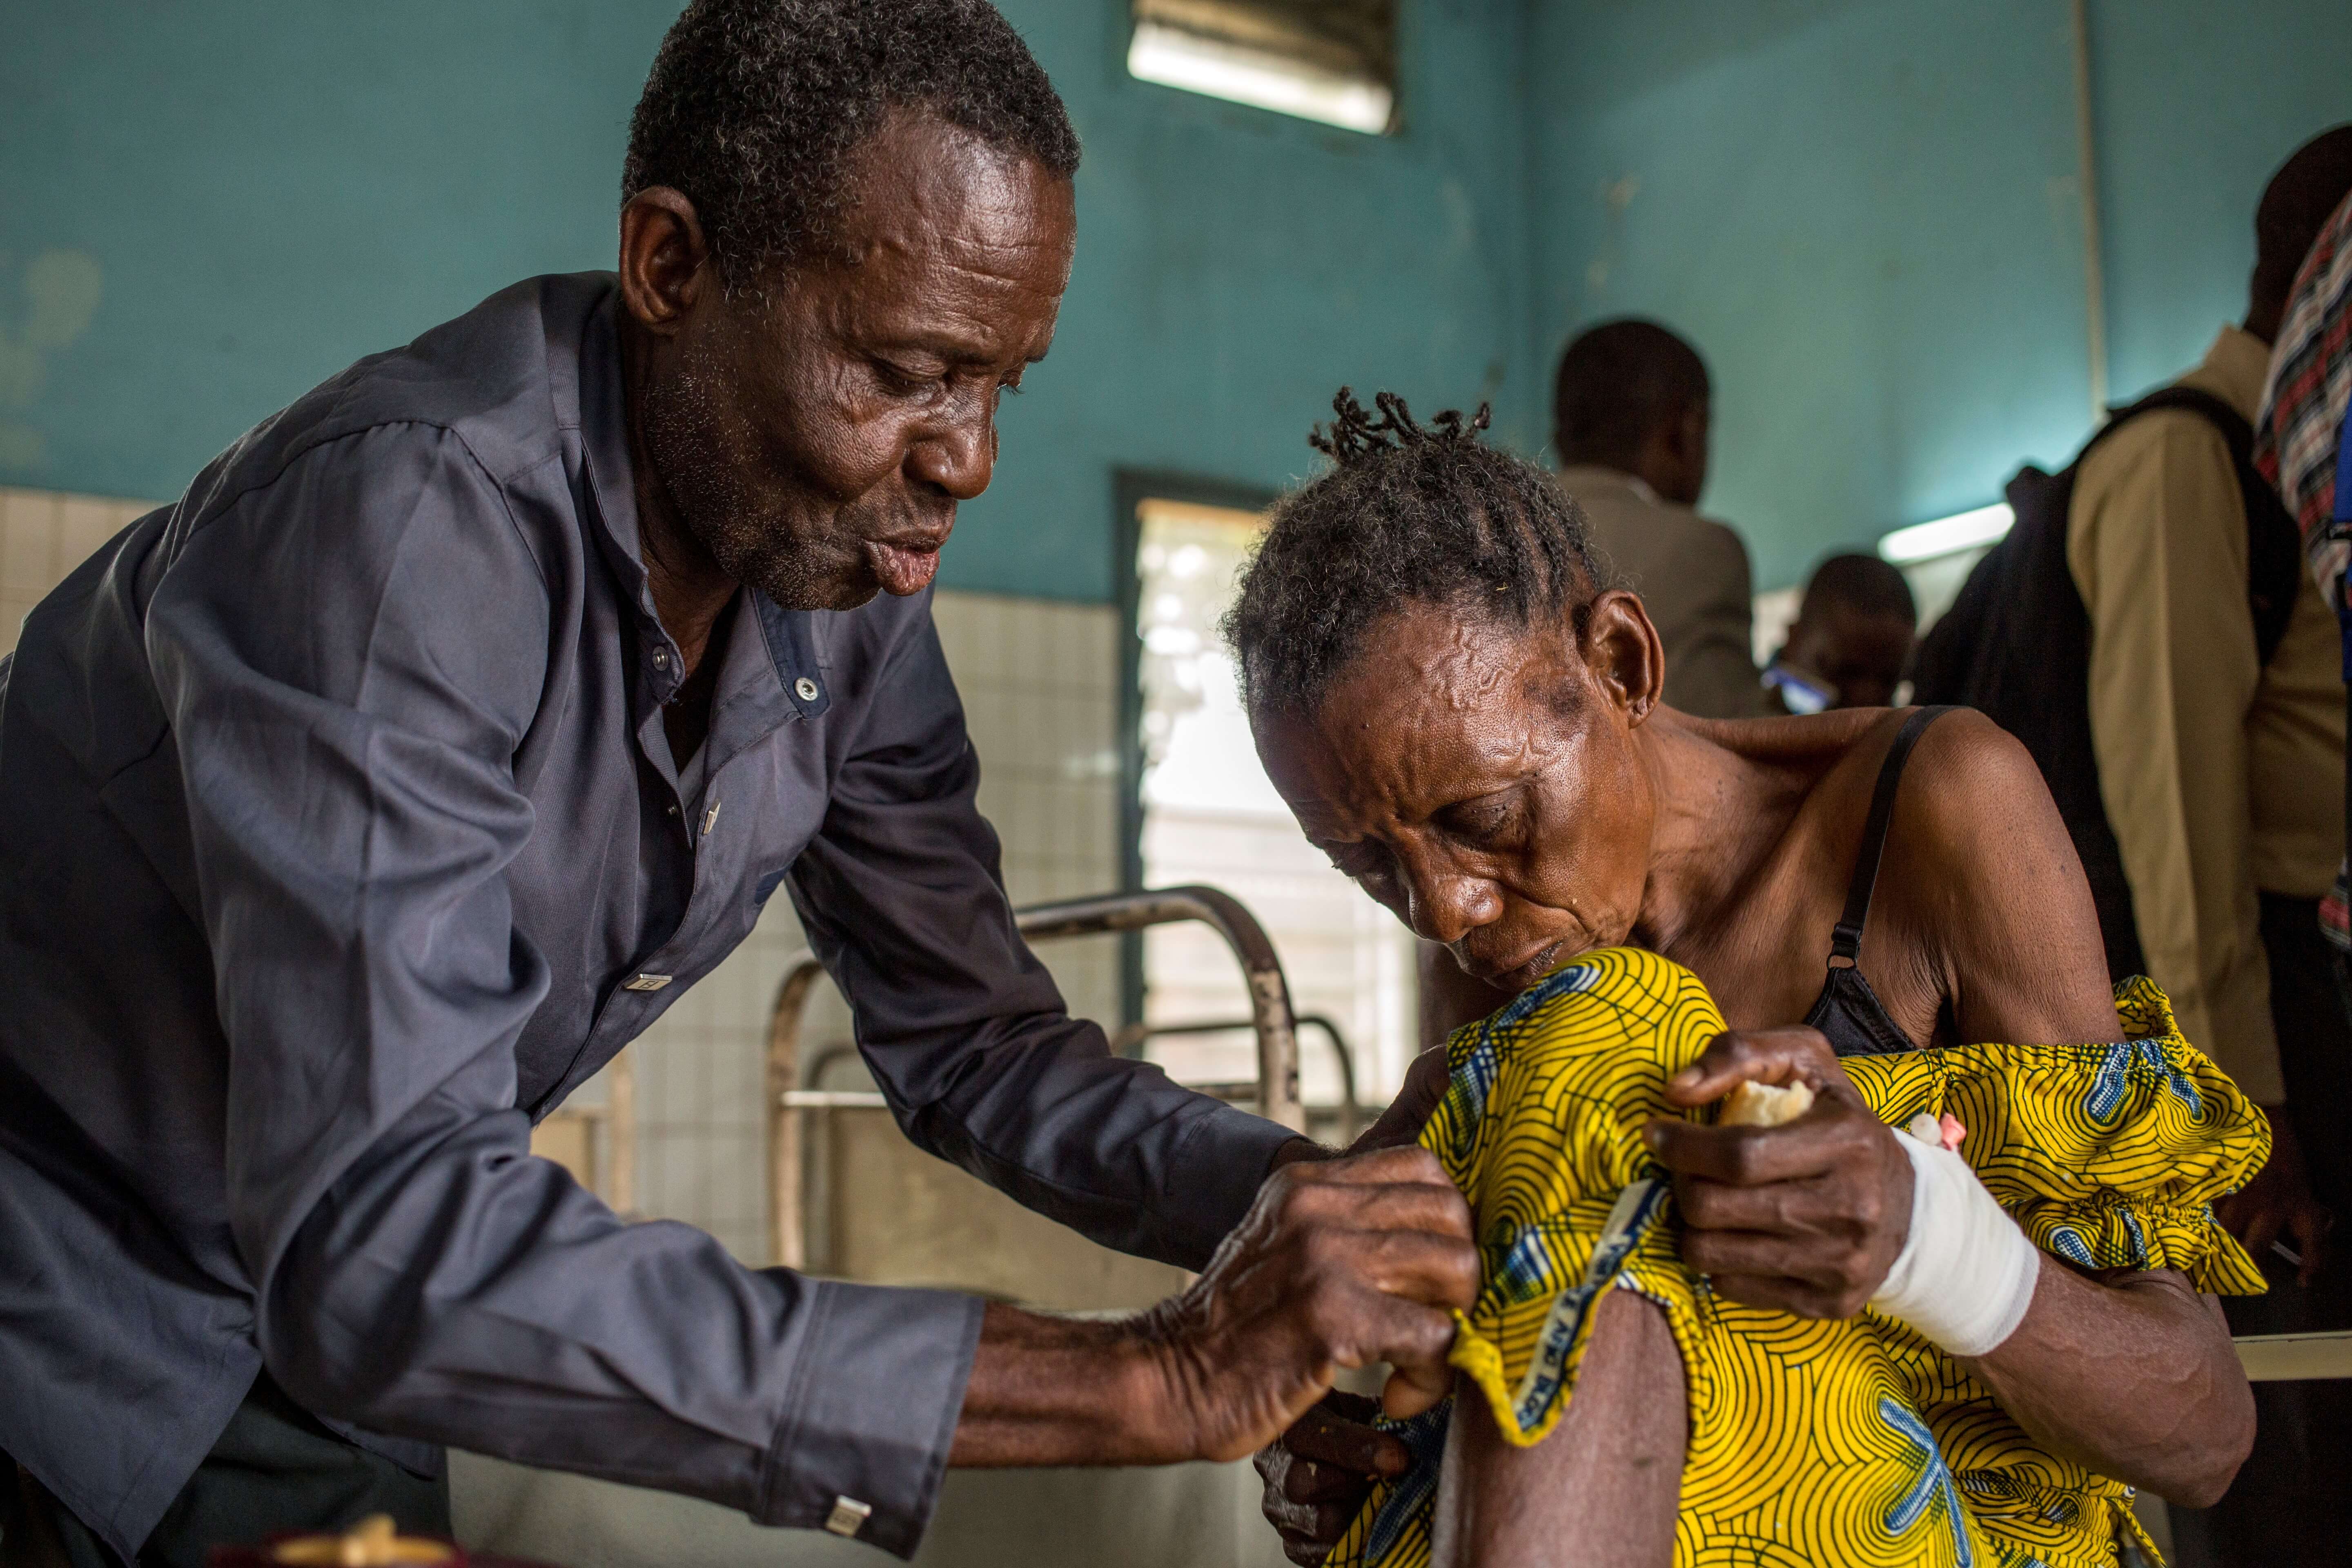 A patient suffering from sleeping sickness visits a hospital in DRC. PATH/Georgina Goodwin